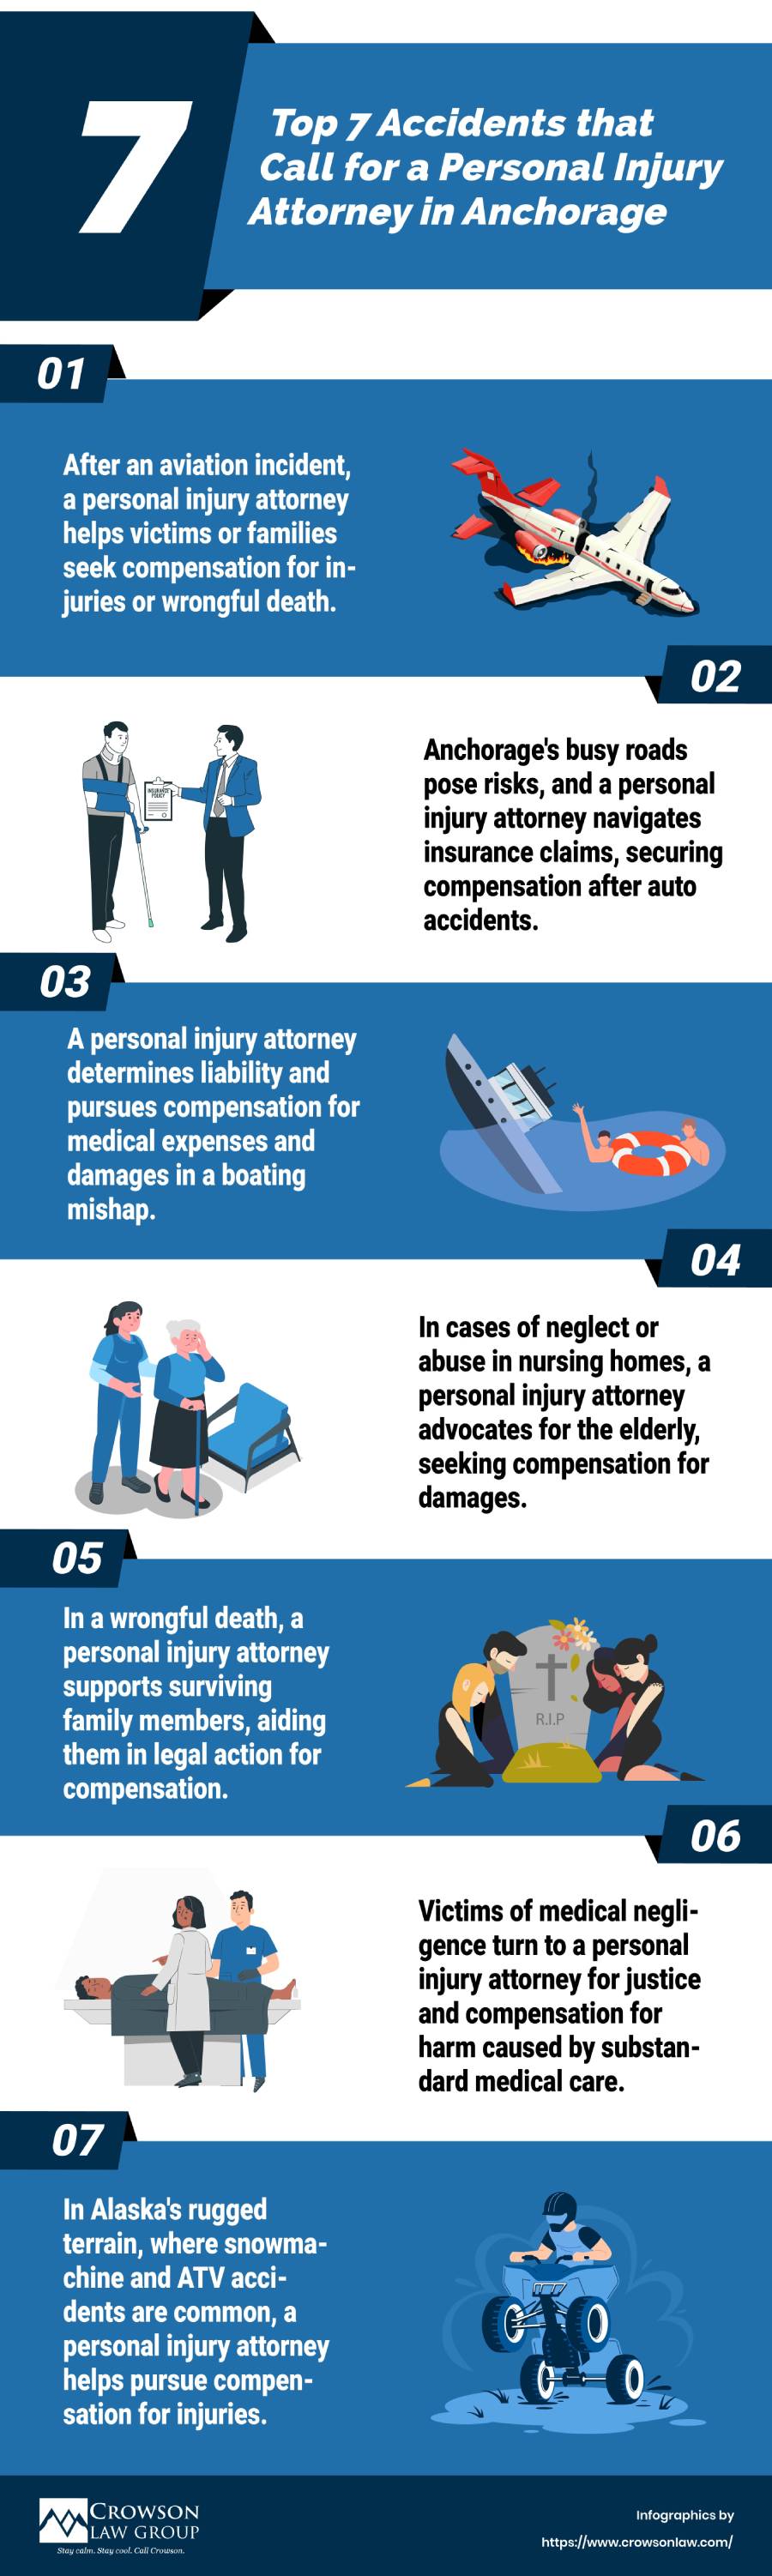 Personal Injury Attorney in Anchorage